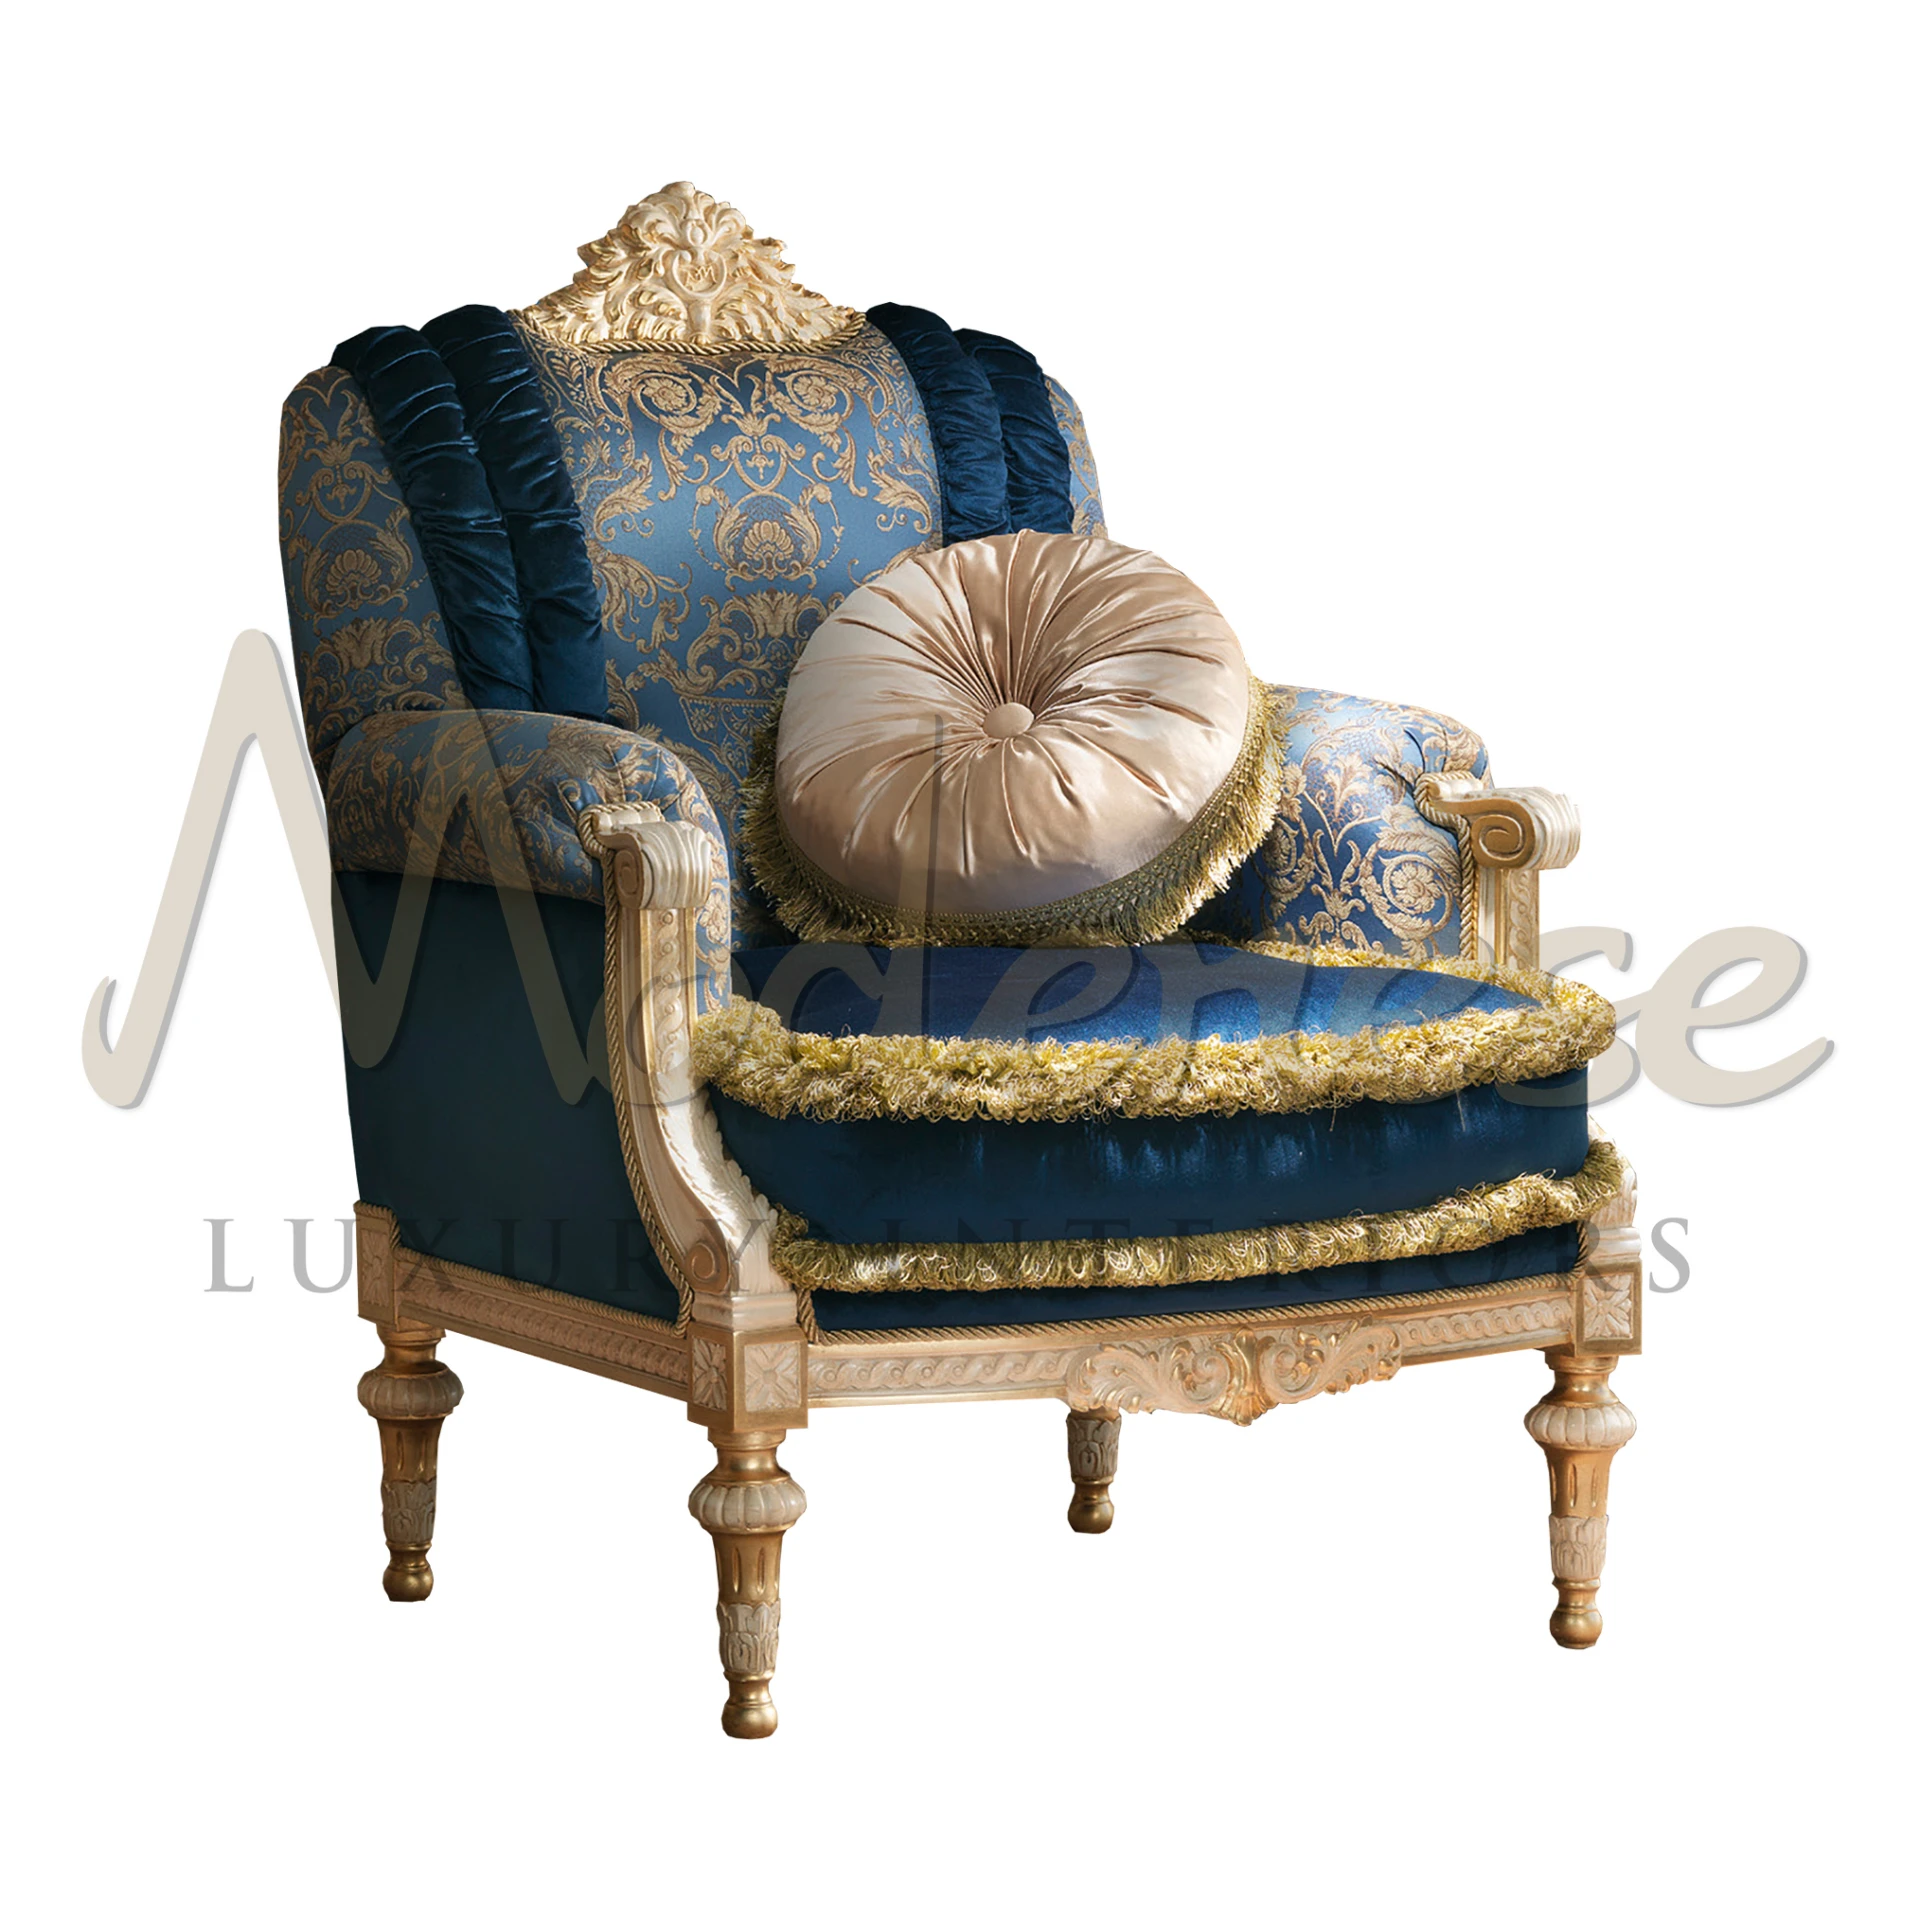 Royal blue velvet armchair with gold damask patterns and ornate golden wood carvings.